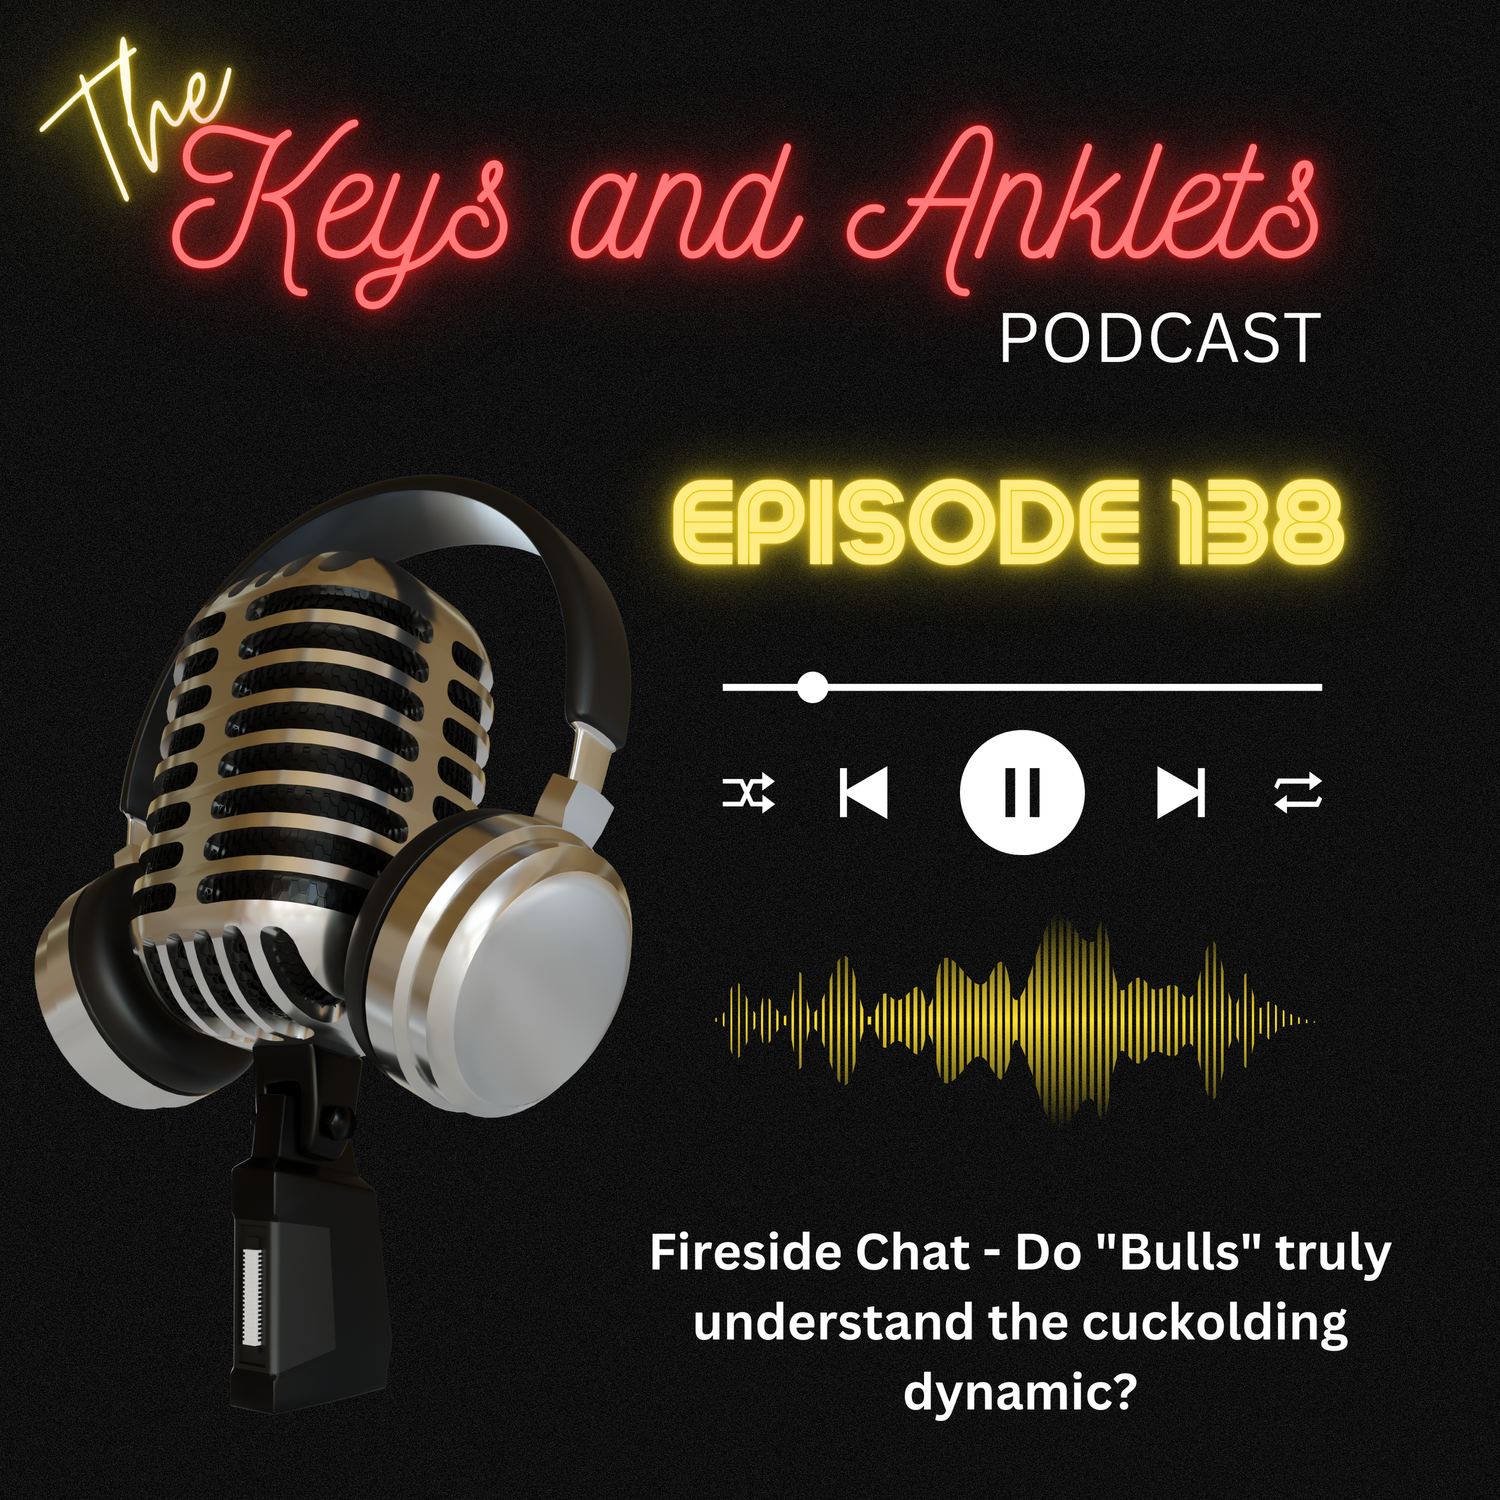 Episode 138 - Fireside Chat - Do Bulls truly understand the cuckolding dynamic?